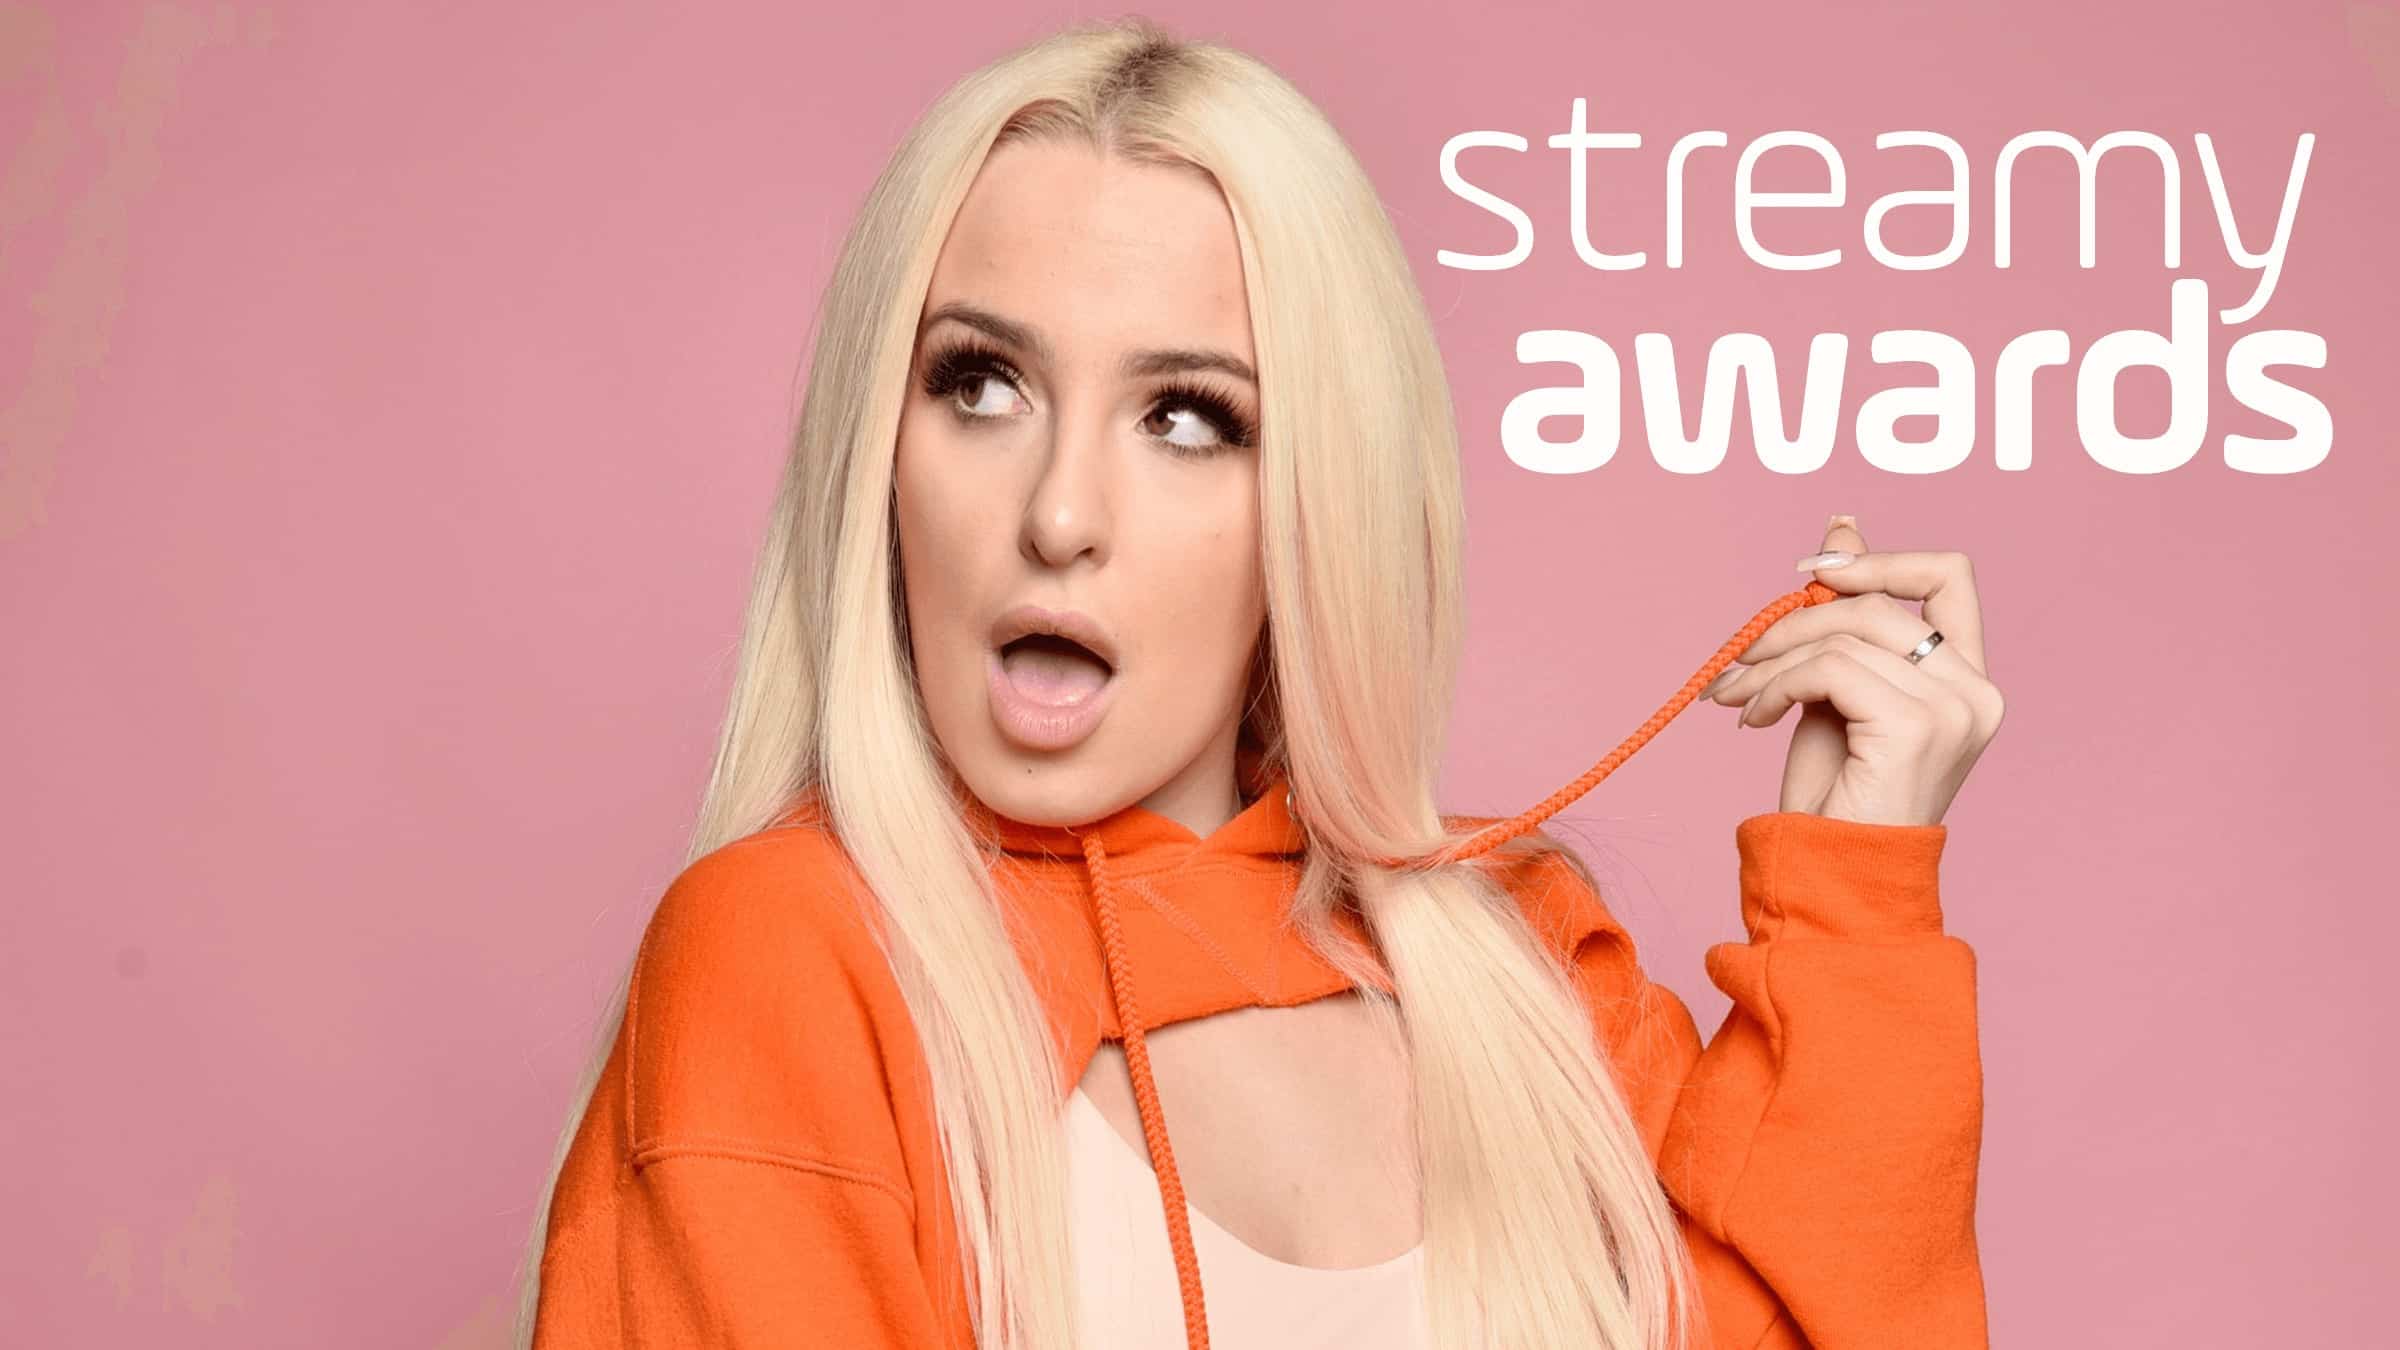 Here’s What You Missed from the 9th Annual Streamy Awards NeoReach